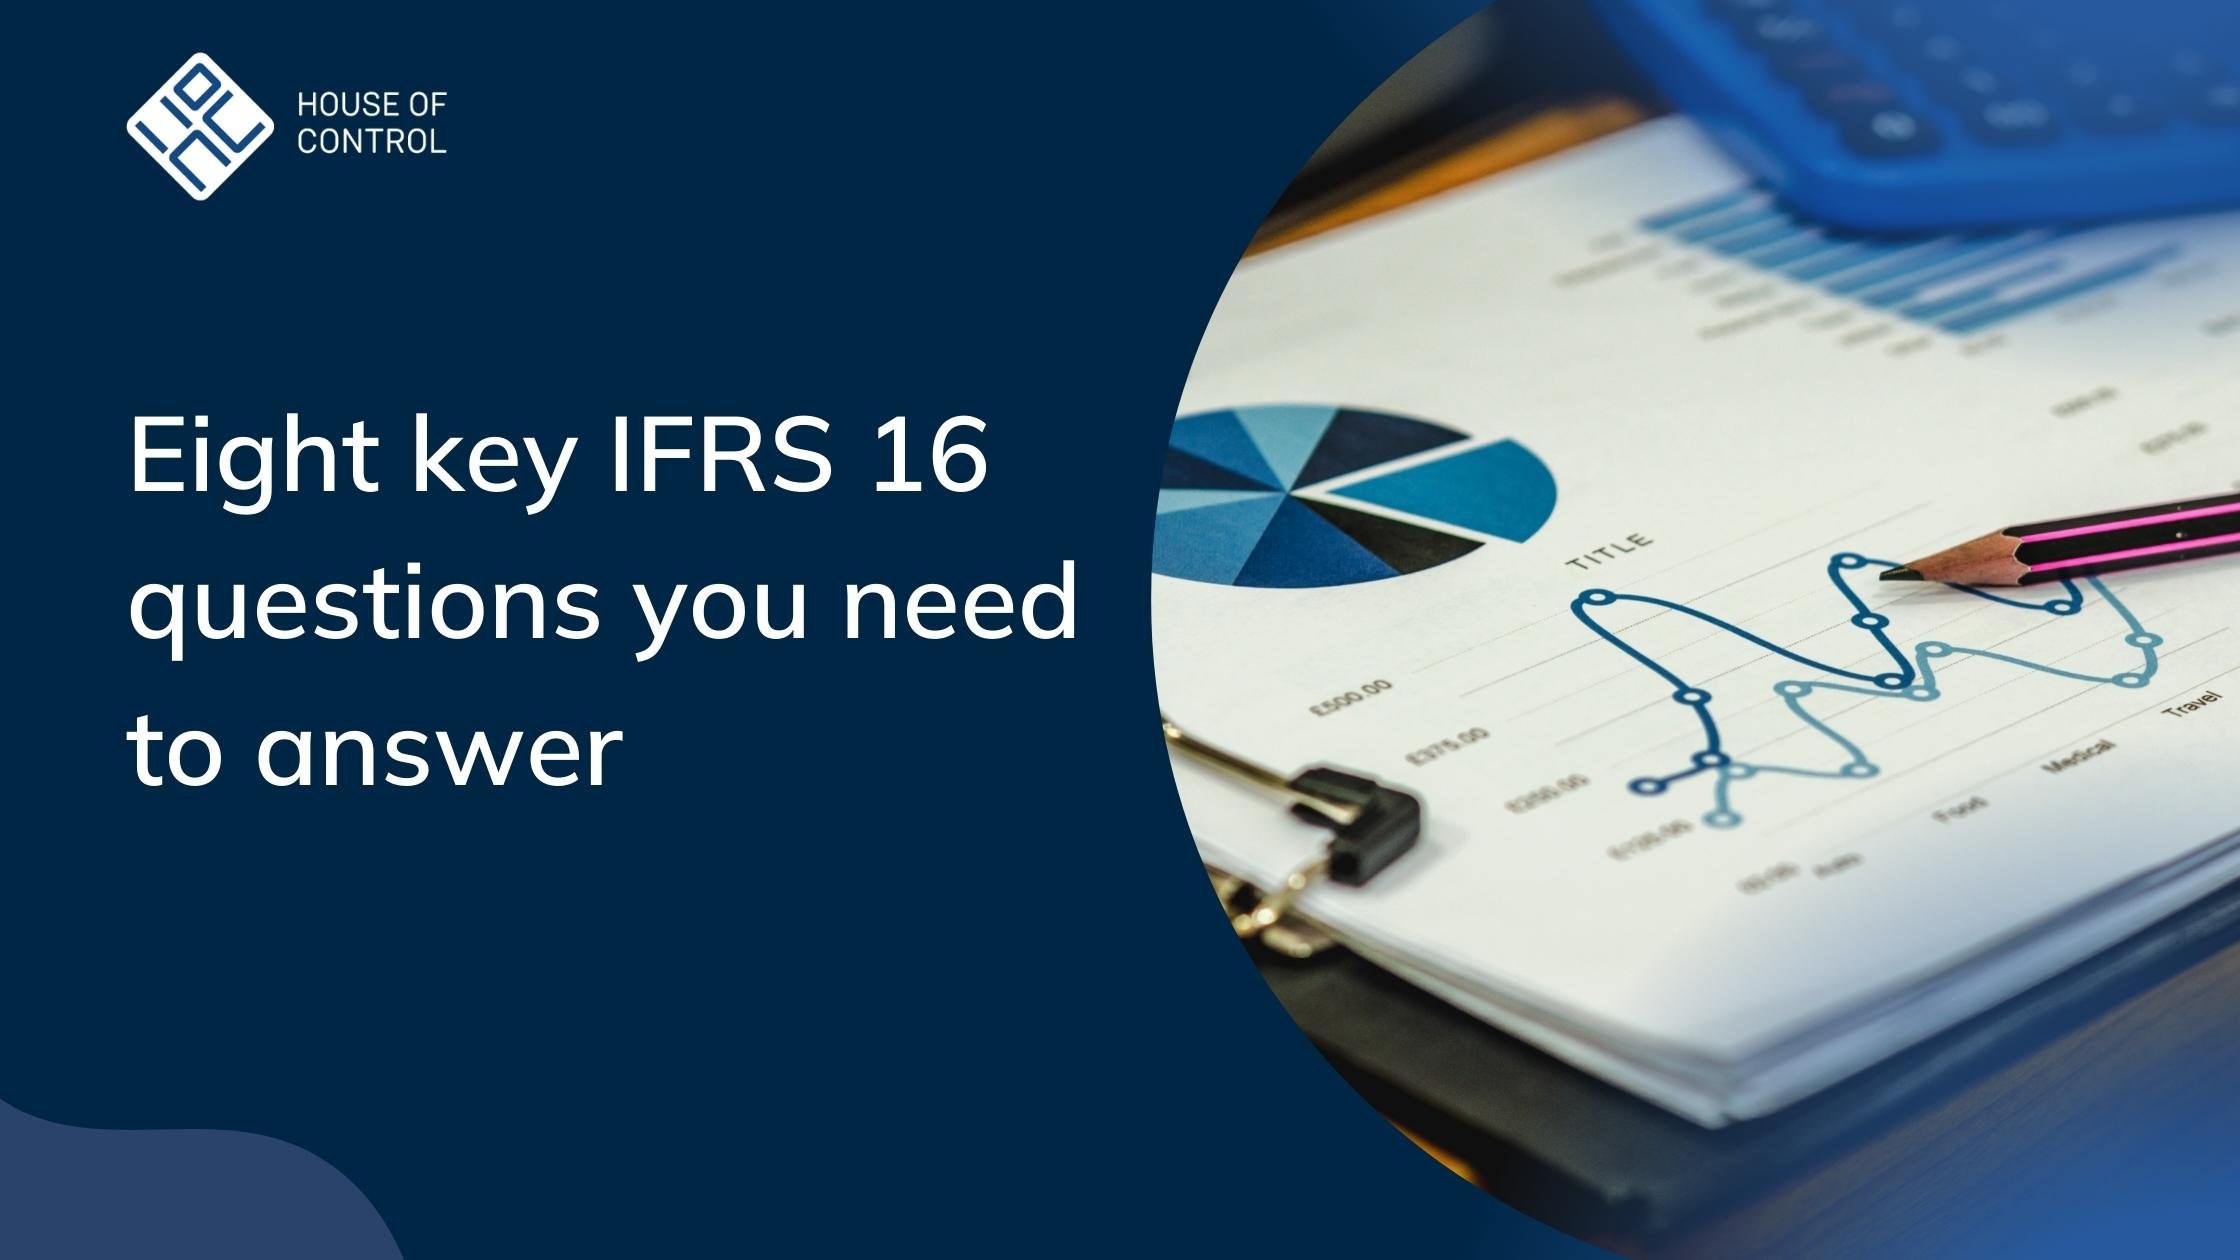 Eight key IFRS 16 questions you need to answer